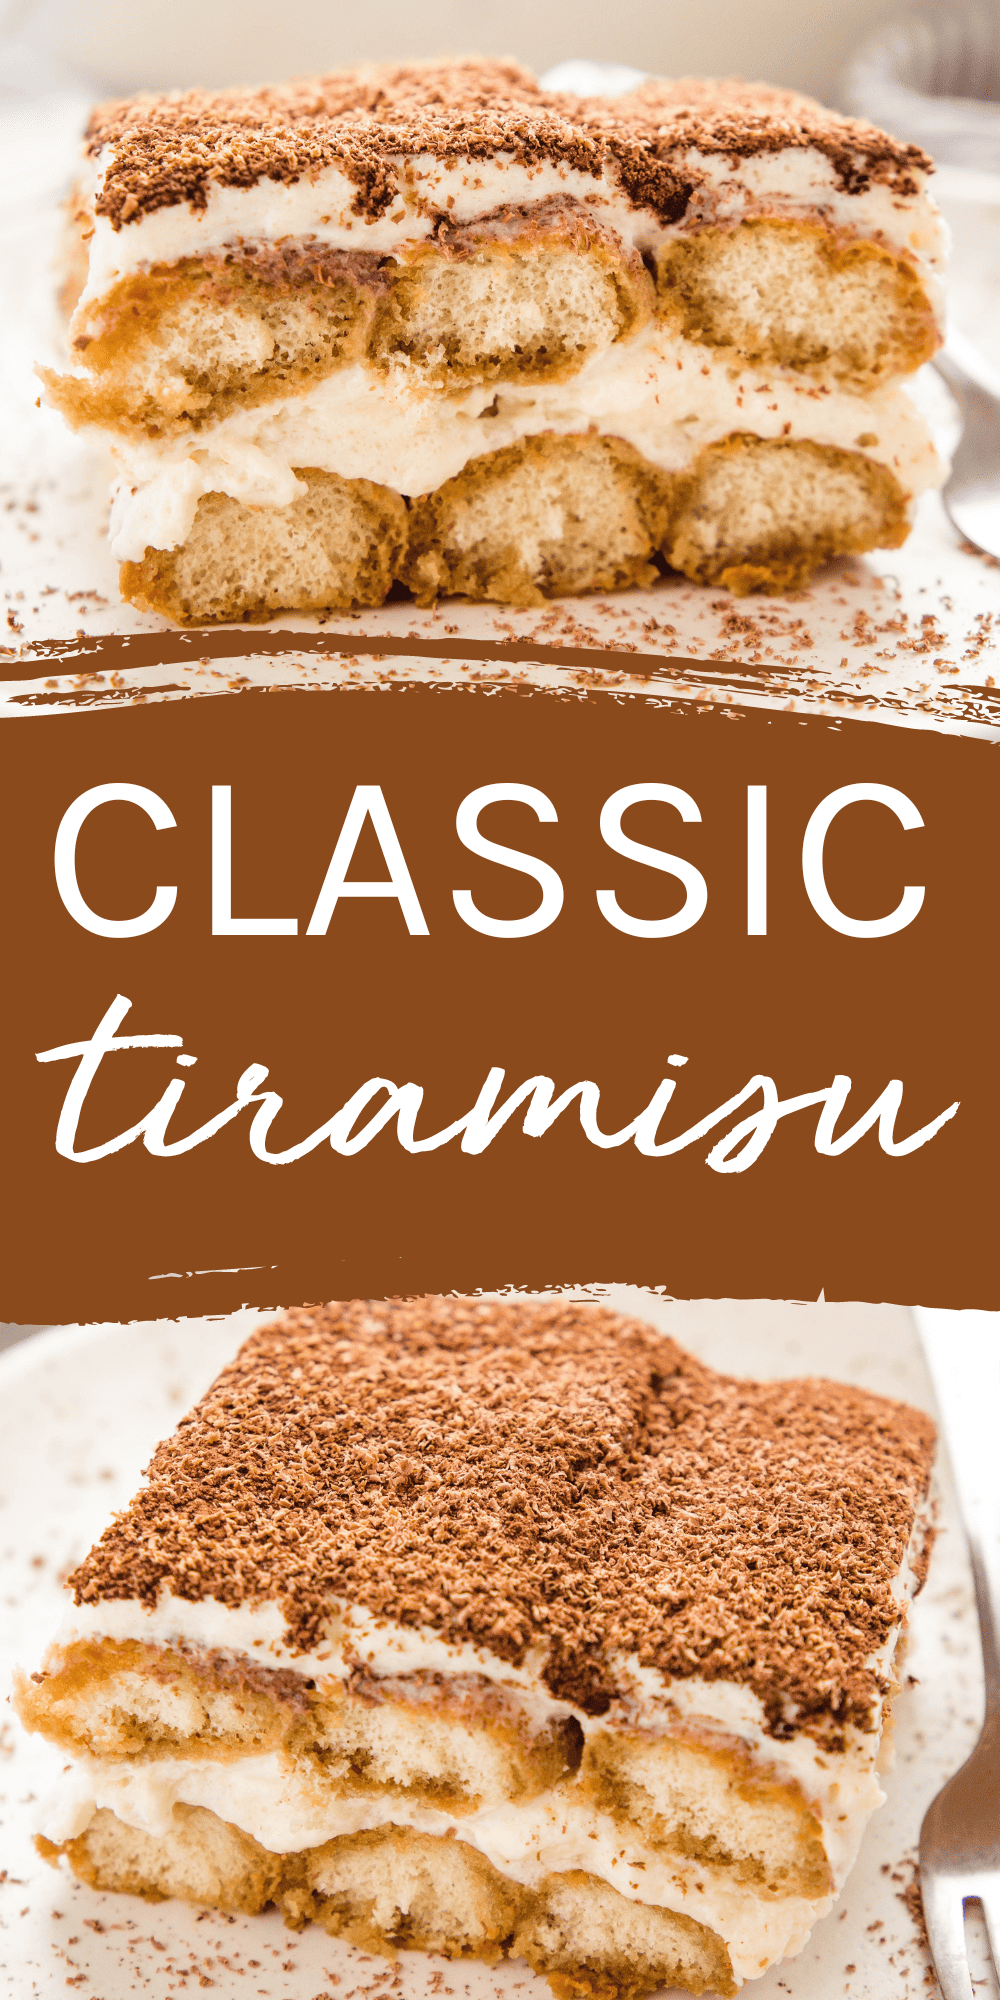 This Tiramisu recipe is a classic Italian dessert that's simple to make with coffee-soaked ladyfingers and a rich-tasting, light and fluffy mascarpone cream. An easy-to-make traditional dessert everyone will love! Recipe from thebusybaker.ca! #tiramisu #tiramisurecipe #italiantiramisu #easytiramisu #traditionaltiramisu #easydessert #dessertrecipe #nobakedessert via @busybakerblog